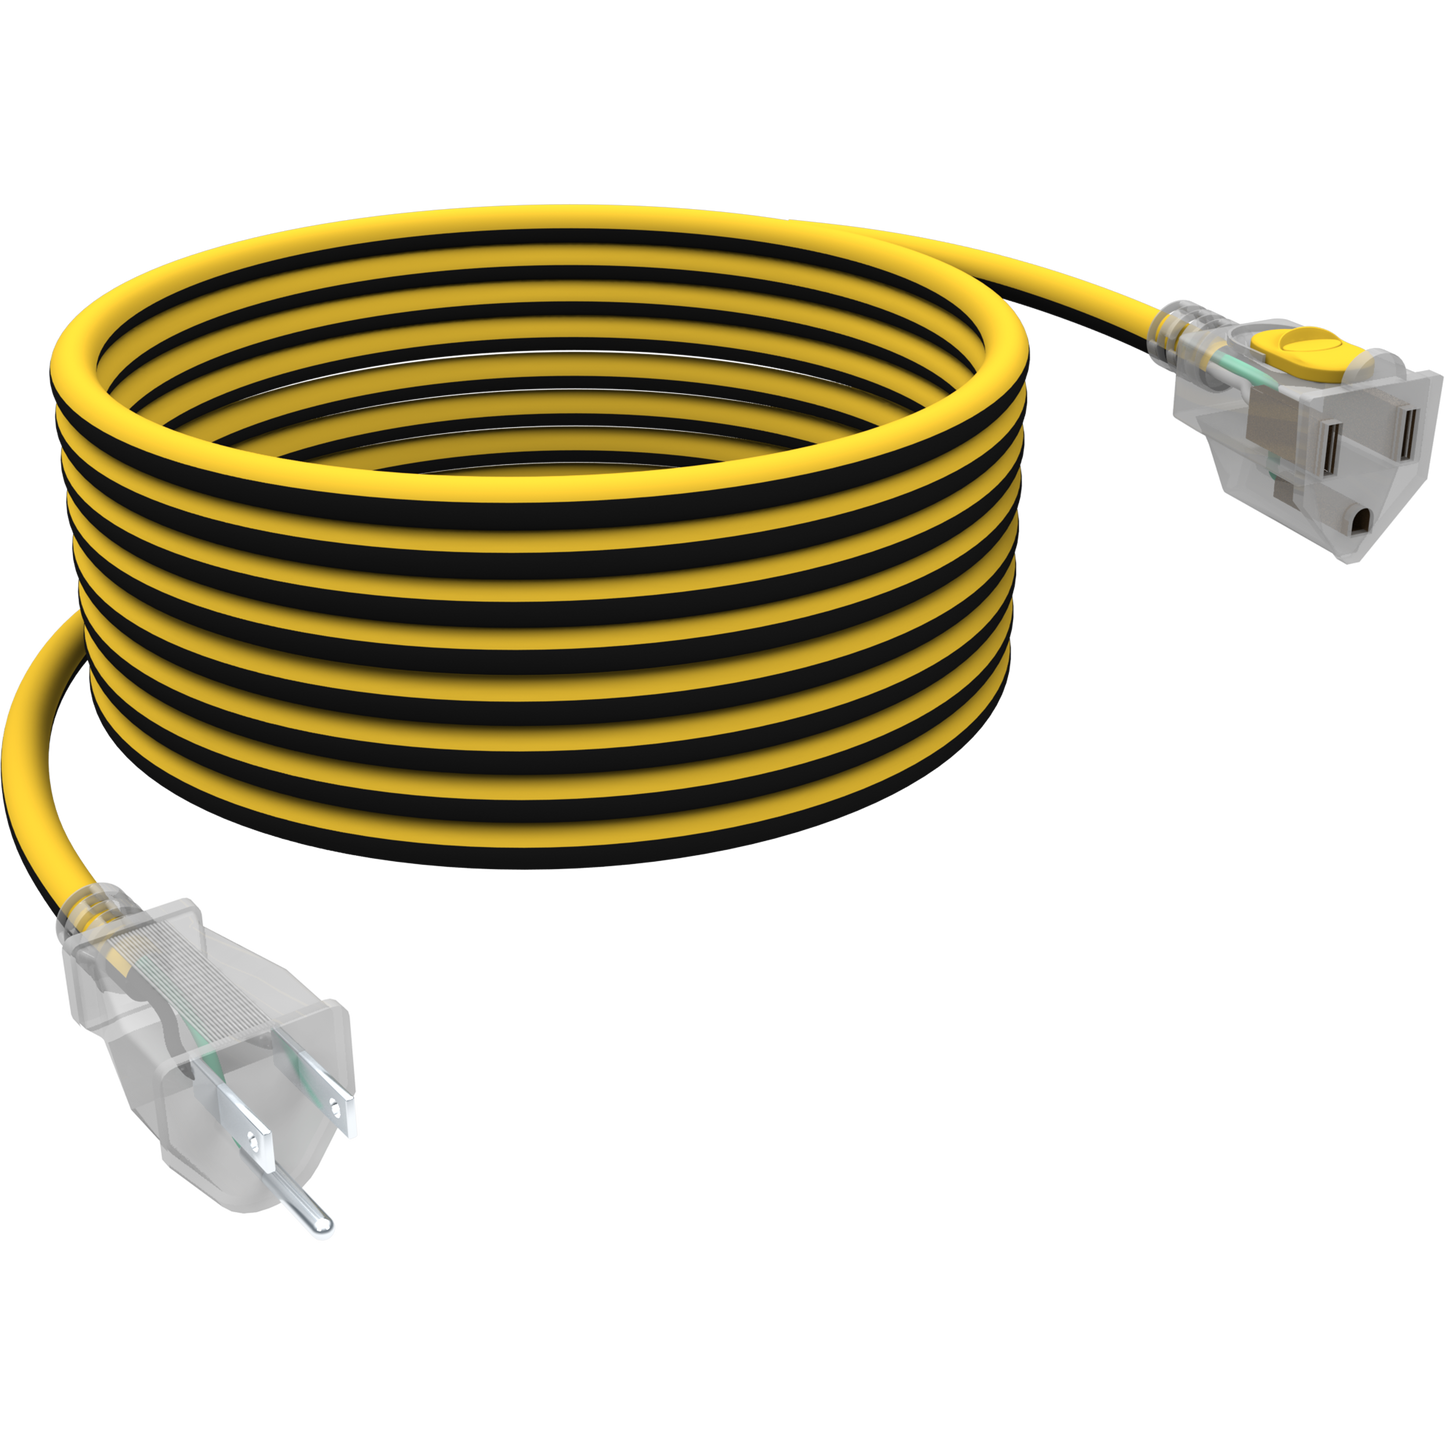 STANLEY 50 FT Contractor Grade Extension Cord, Case of 4